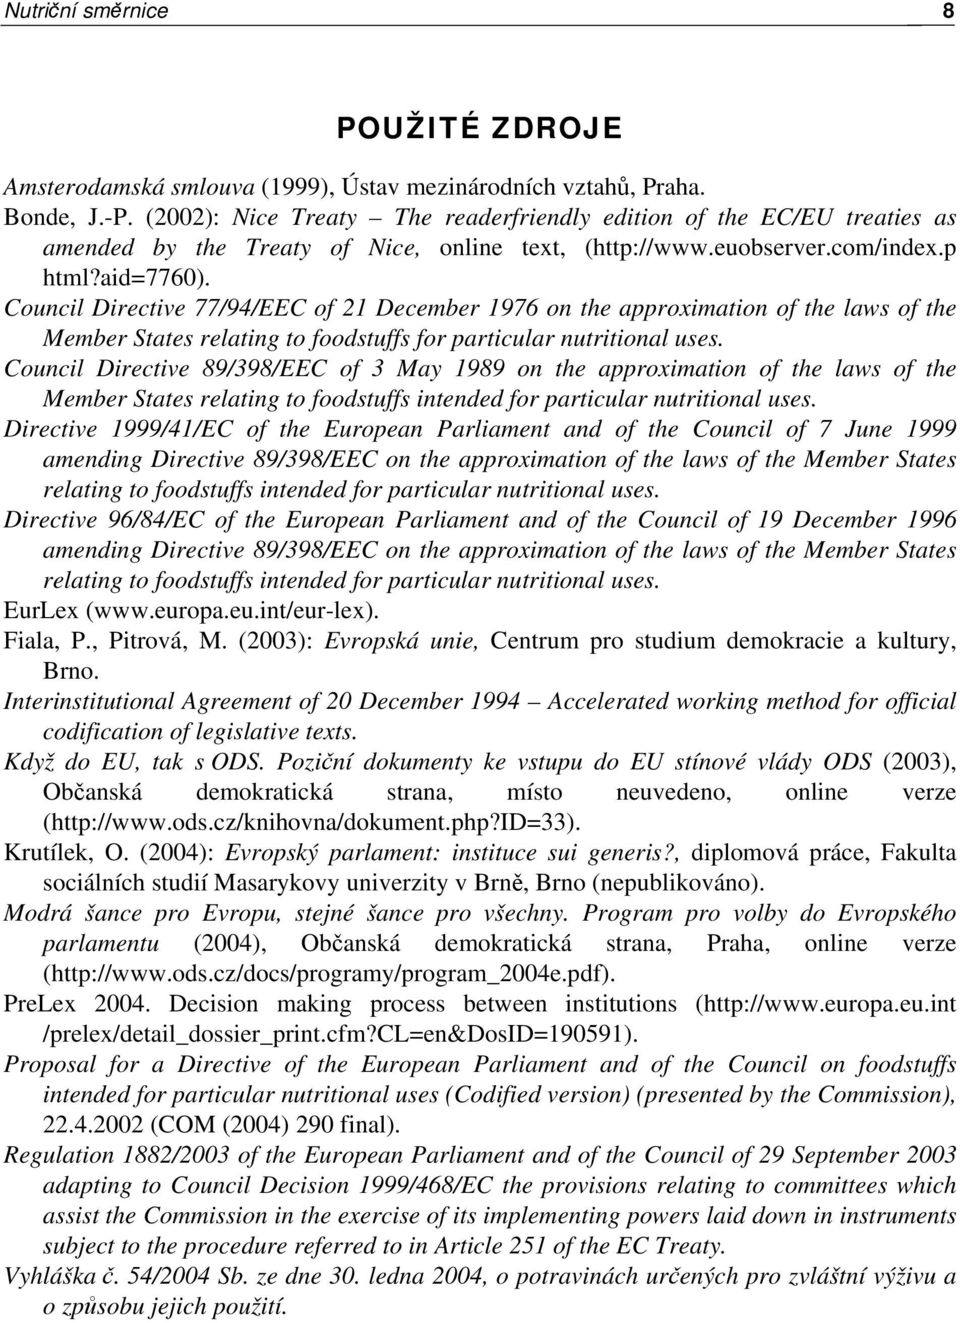 Council Directive 77/94/EEC of 21 December 1976 on the approximation of the laws of the Member States relating to foodstuffs for particular nutritional uses.